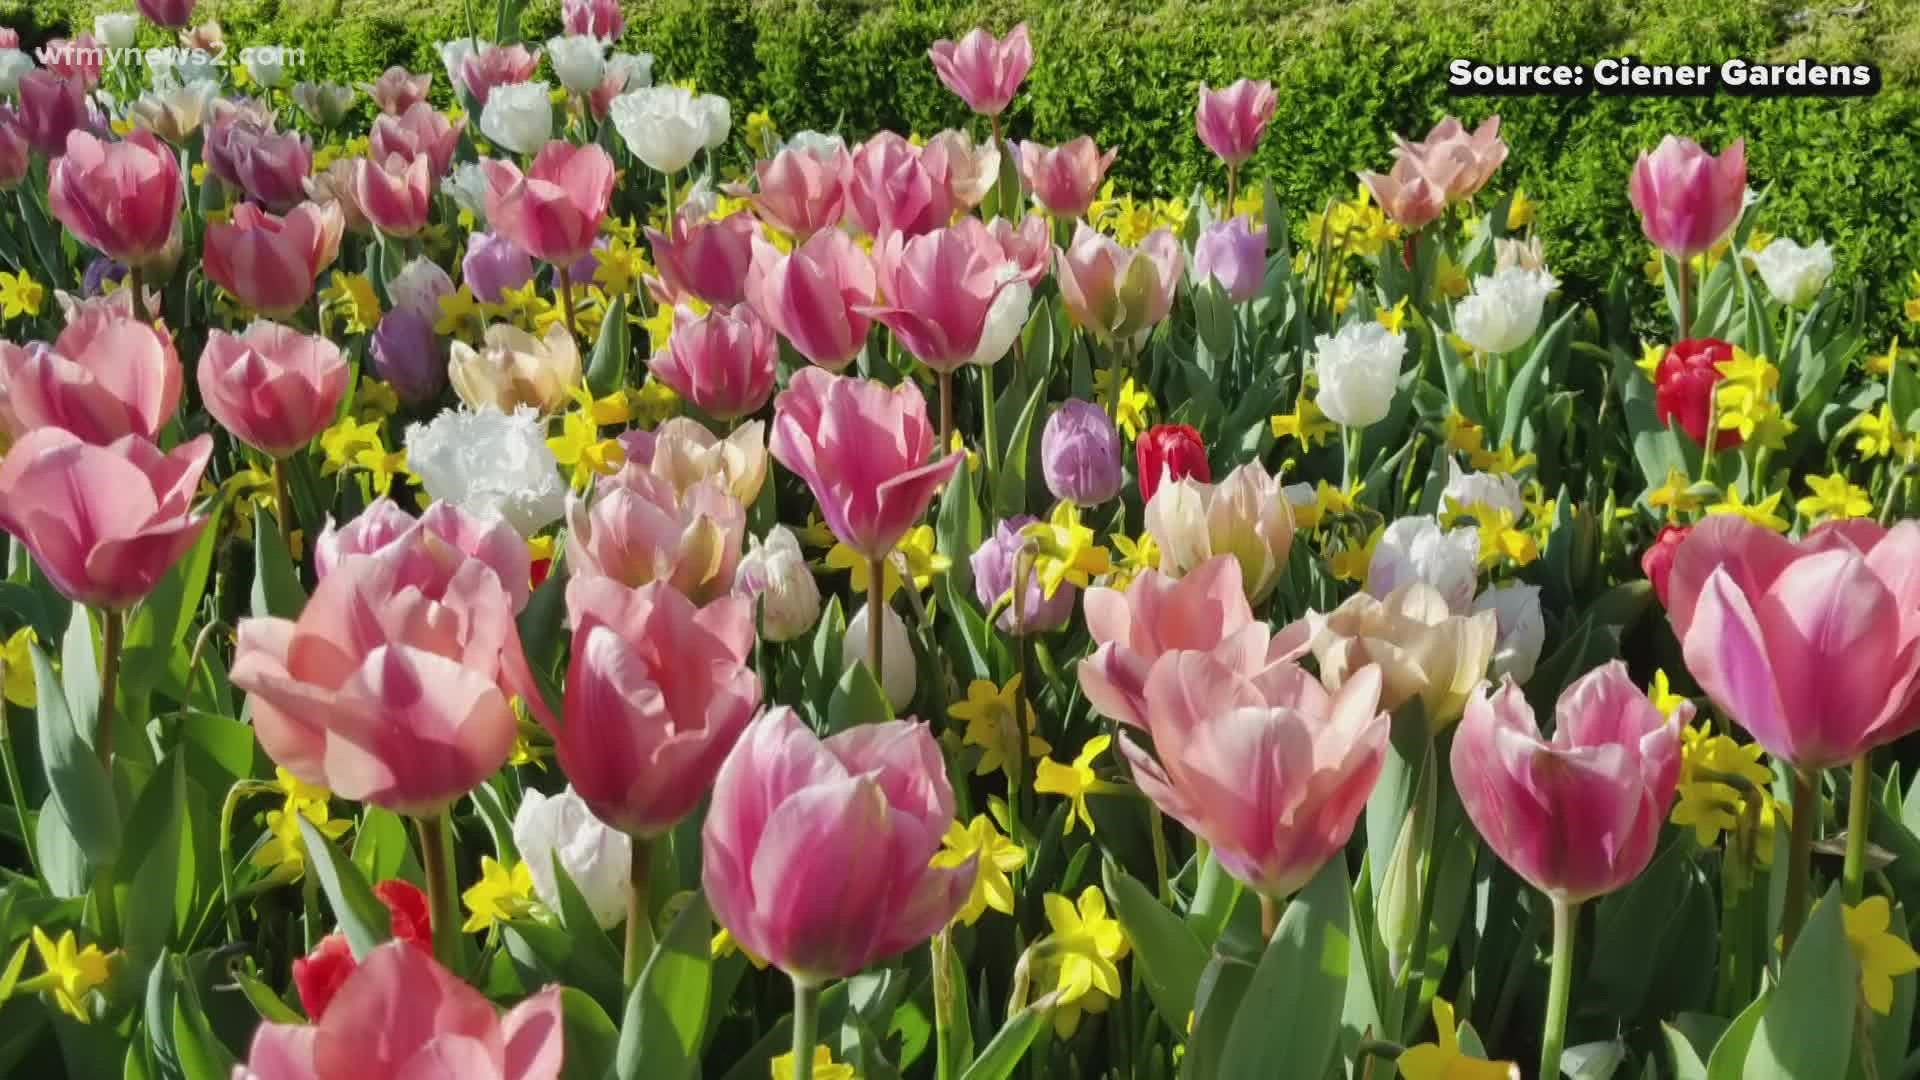 Ciener Botanical Gardens plants more than 18,000 tulips in one garden ahead of its spring celebration.